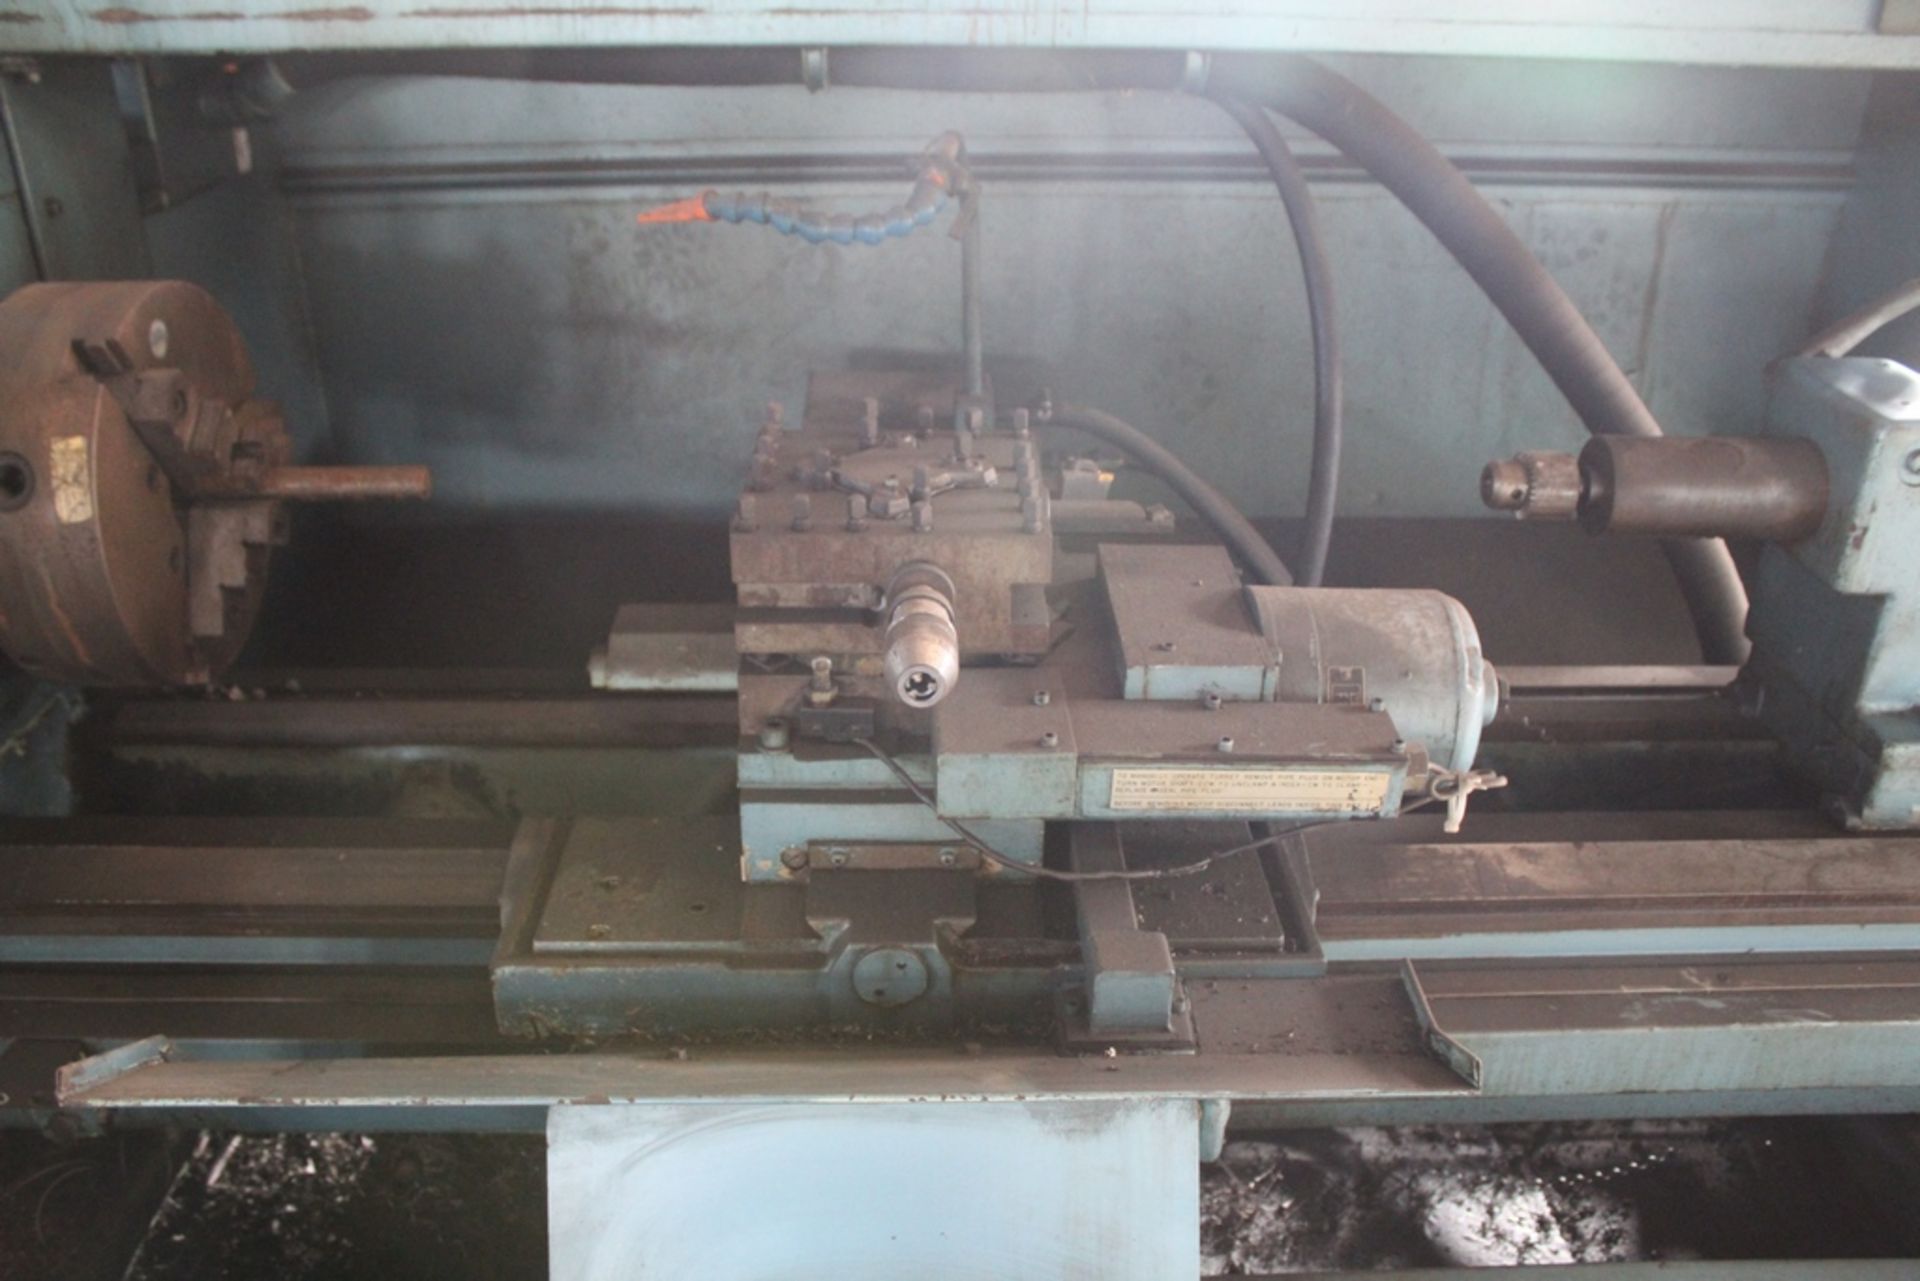 LEBLOND REGAL MODEL TAPE TURN 19" X 54" LATHE, WITH UPGRADED FAGOR CNC CONTROL (CONTROL NOT IN - Image 5 of 6